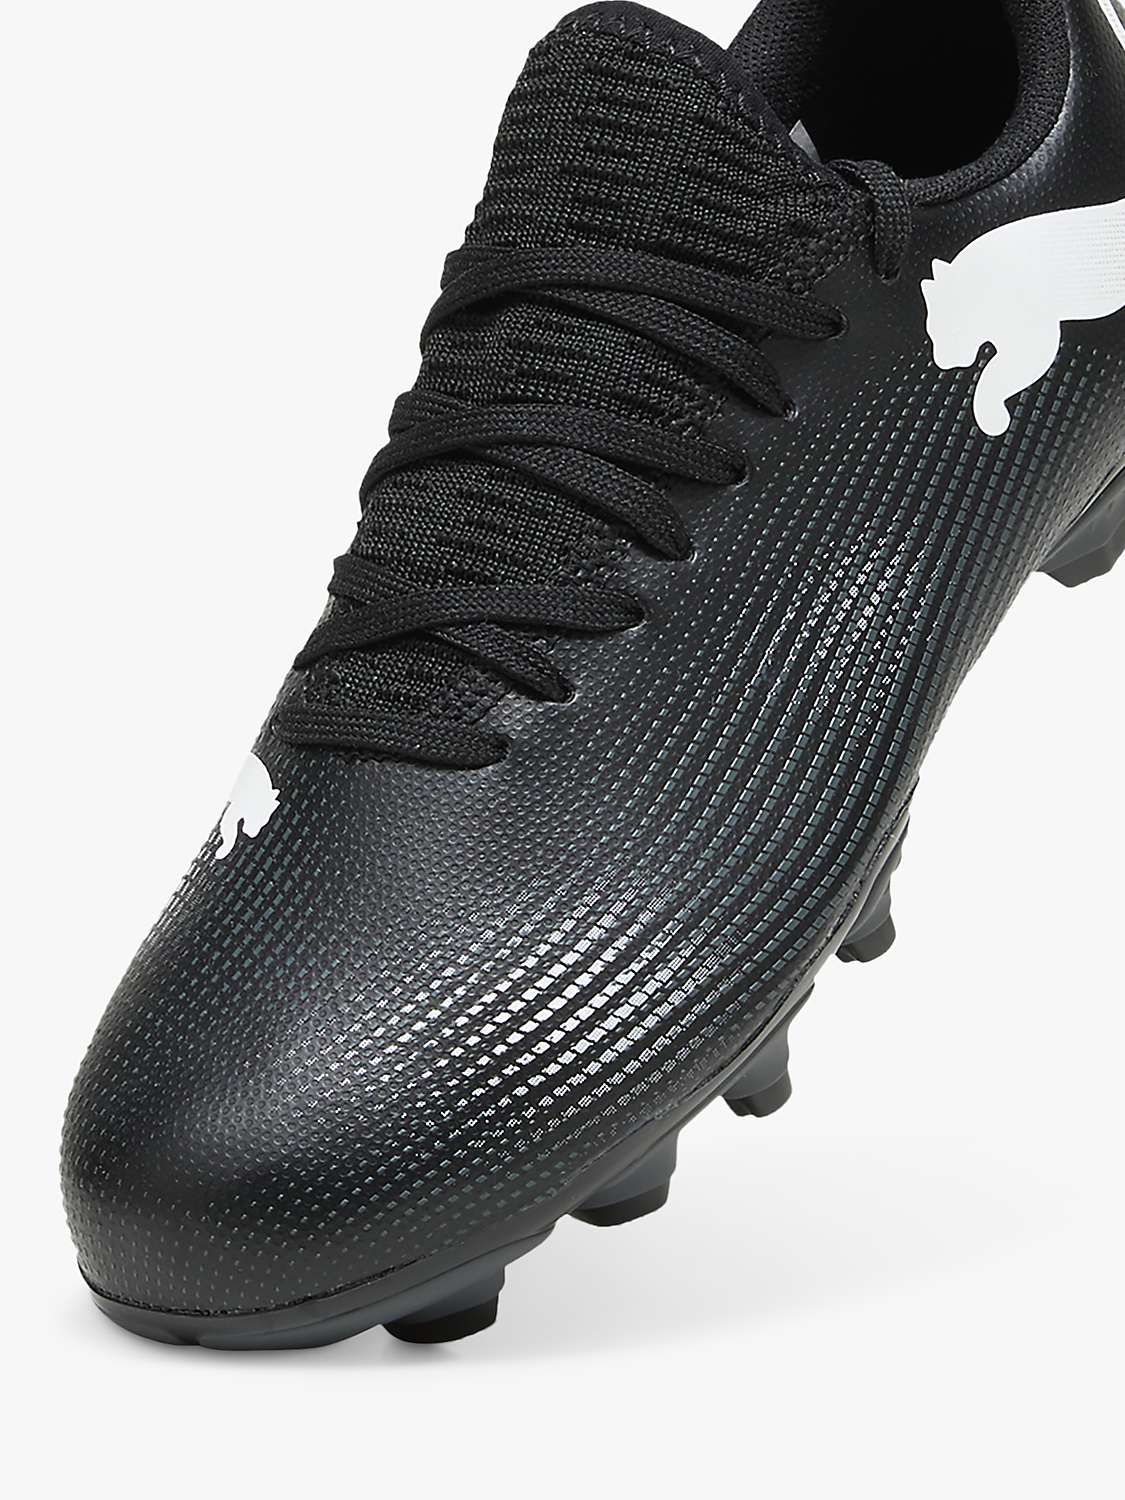 Buy PUMA Kids' Future 7 Playmakers Football Boots Online at johnlewis.com